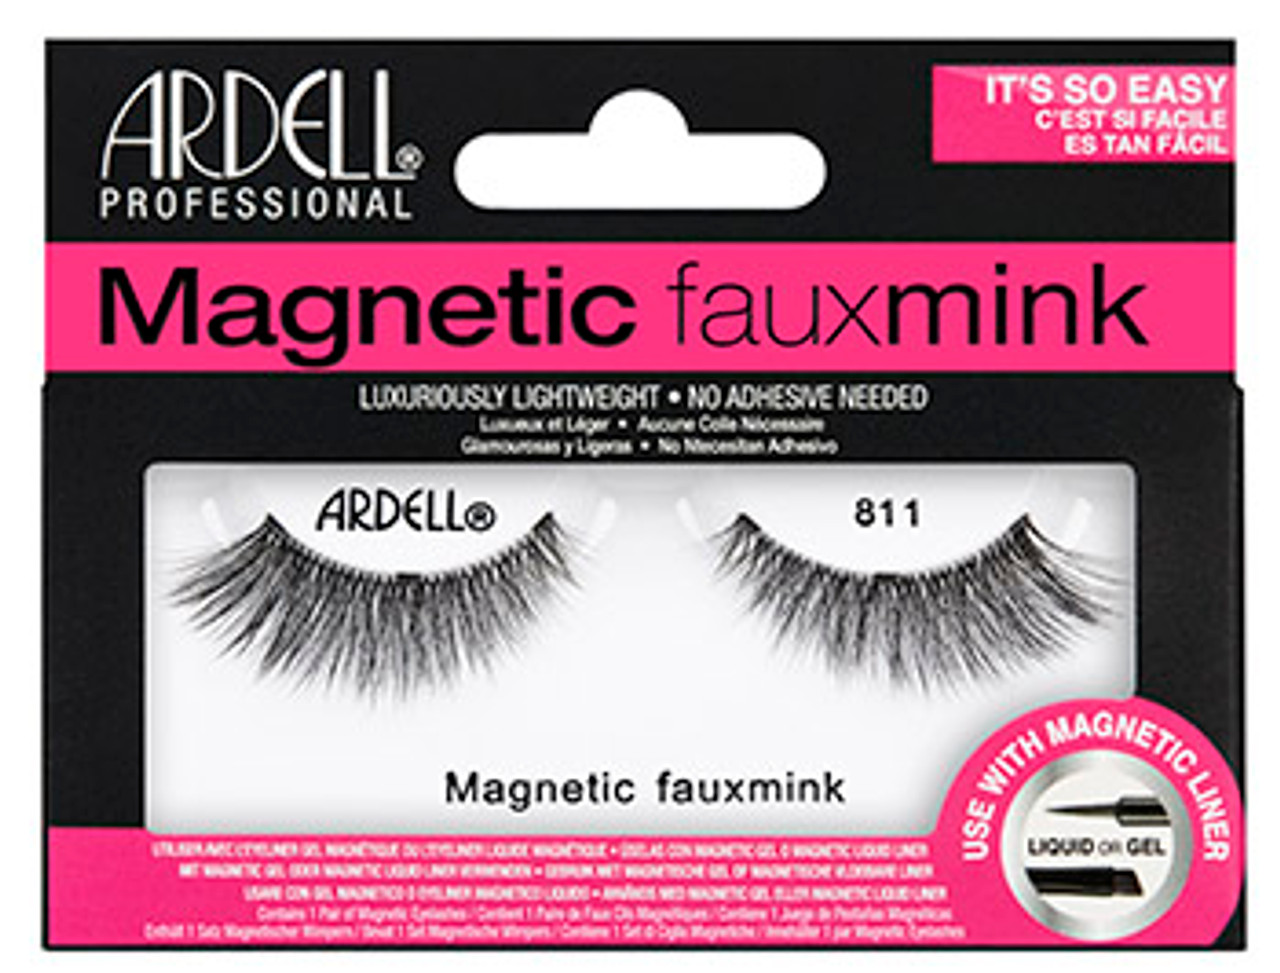 Ardell Professional Magnetic fauxmink 811